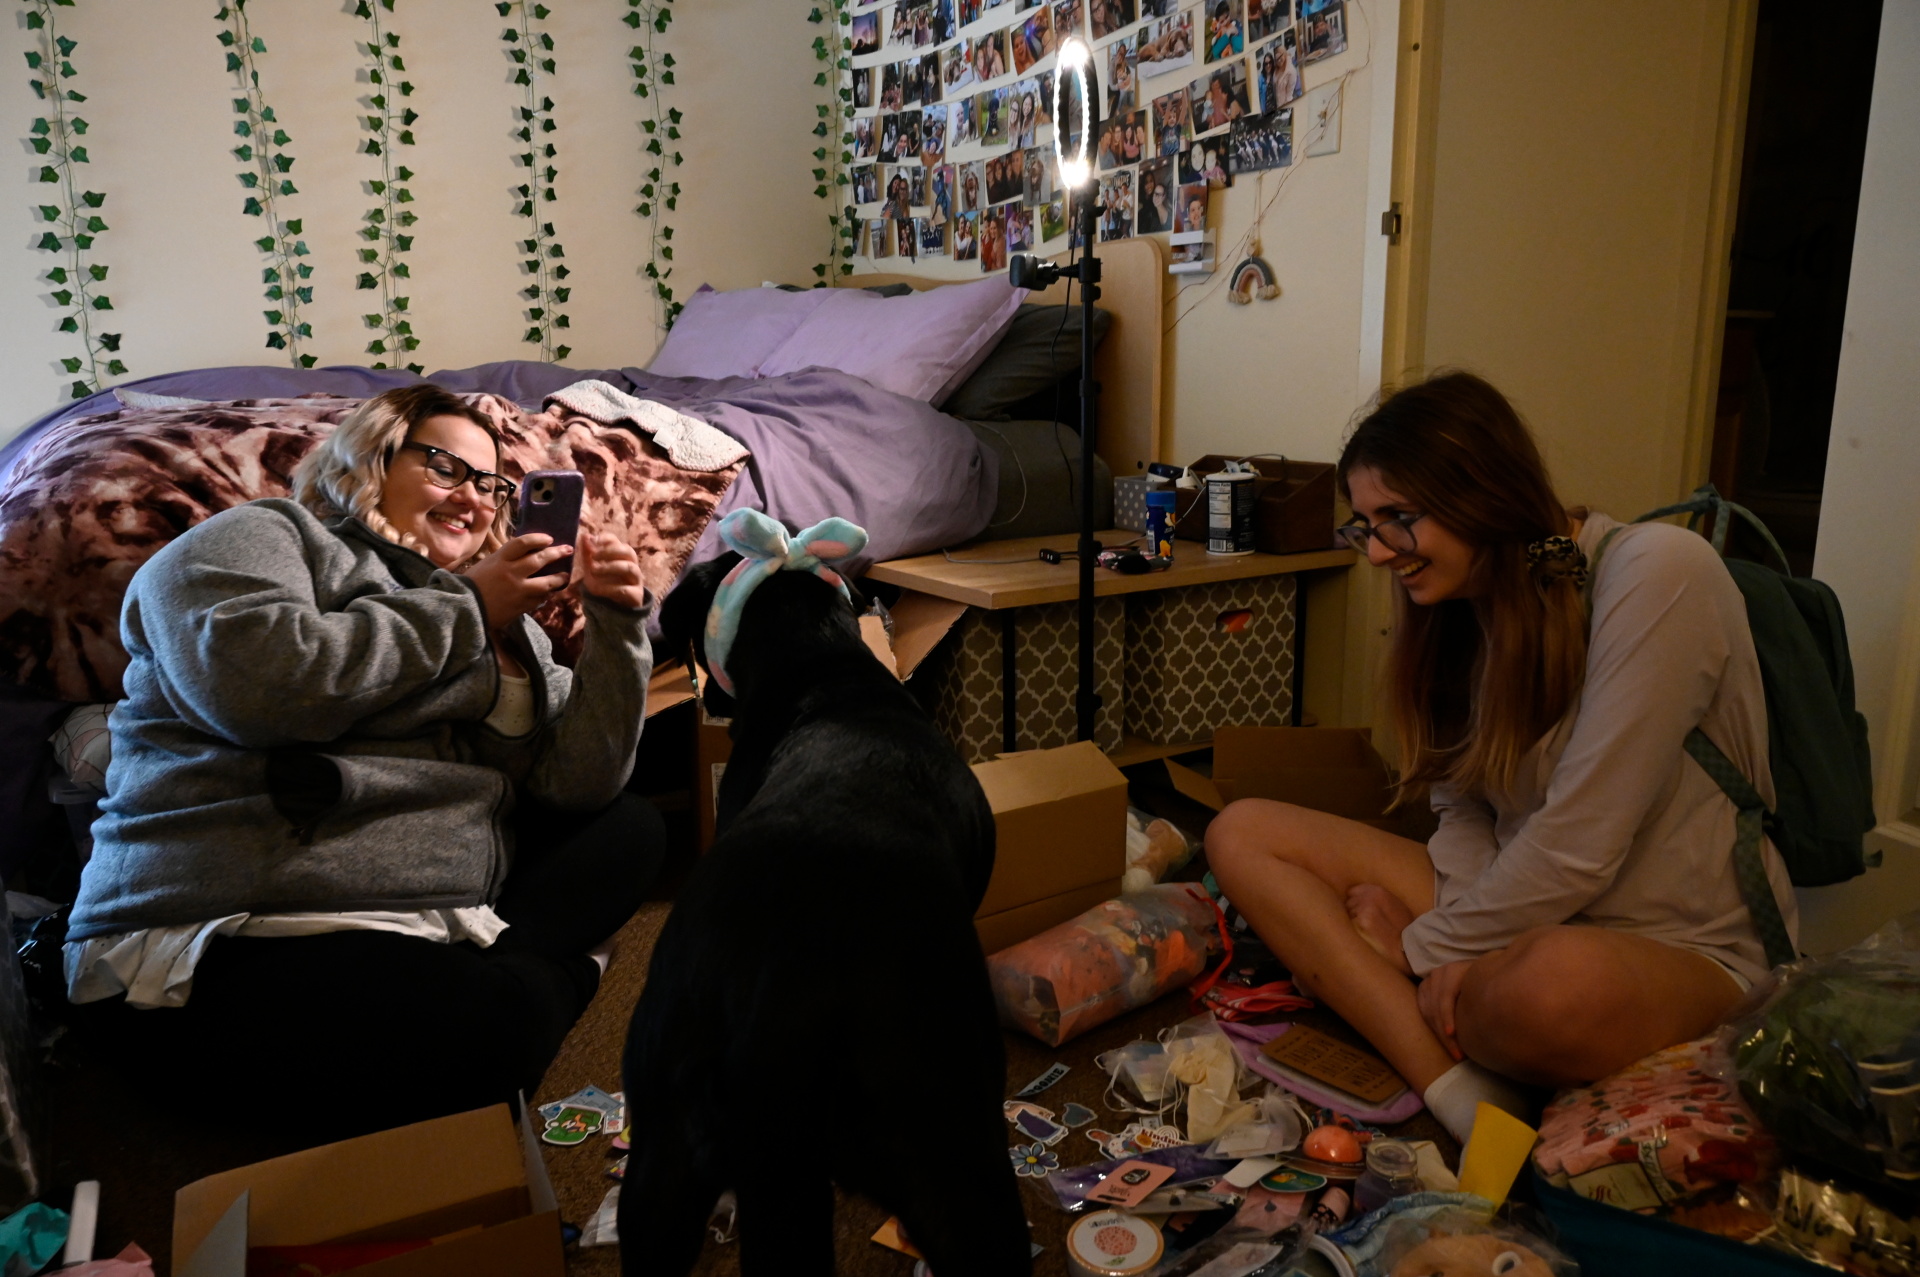 Spencer photographs her dog while preparing a package containing medical and motivational accessories for Shannon McMullen, 20, who has the same medical condition as Nicole, at her apartment in Syracuse, New York, May 6, 2022. Photo: Reuters